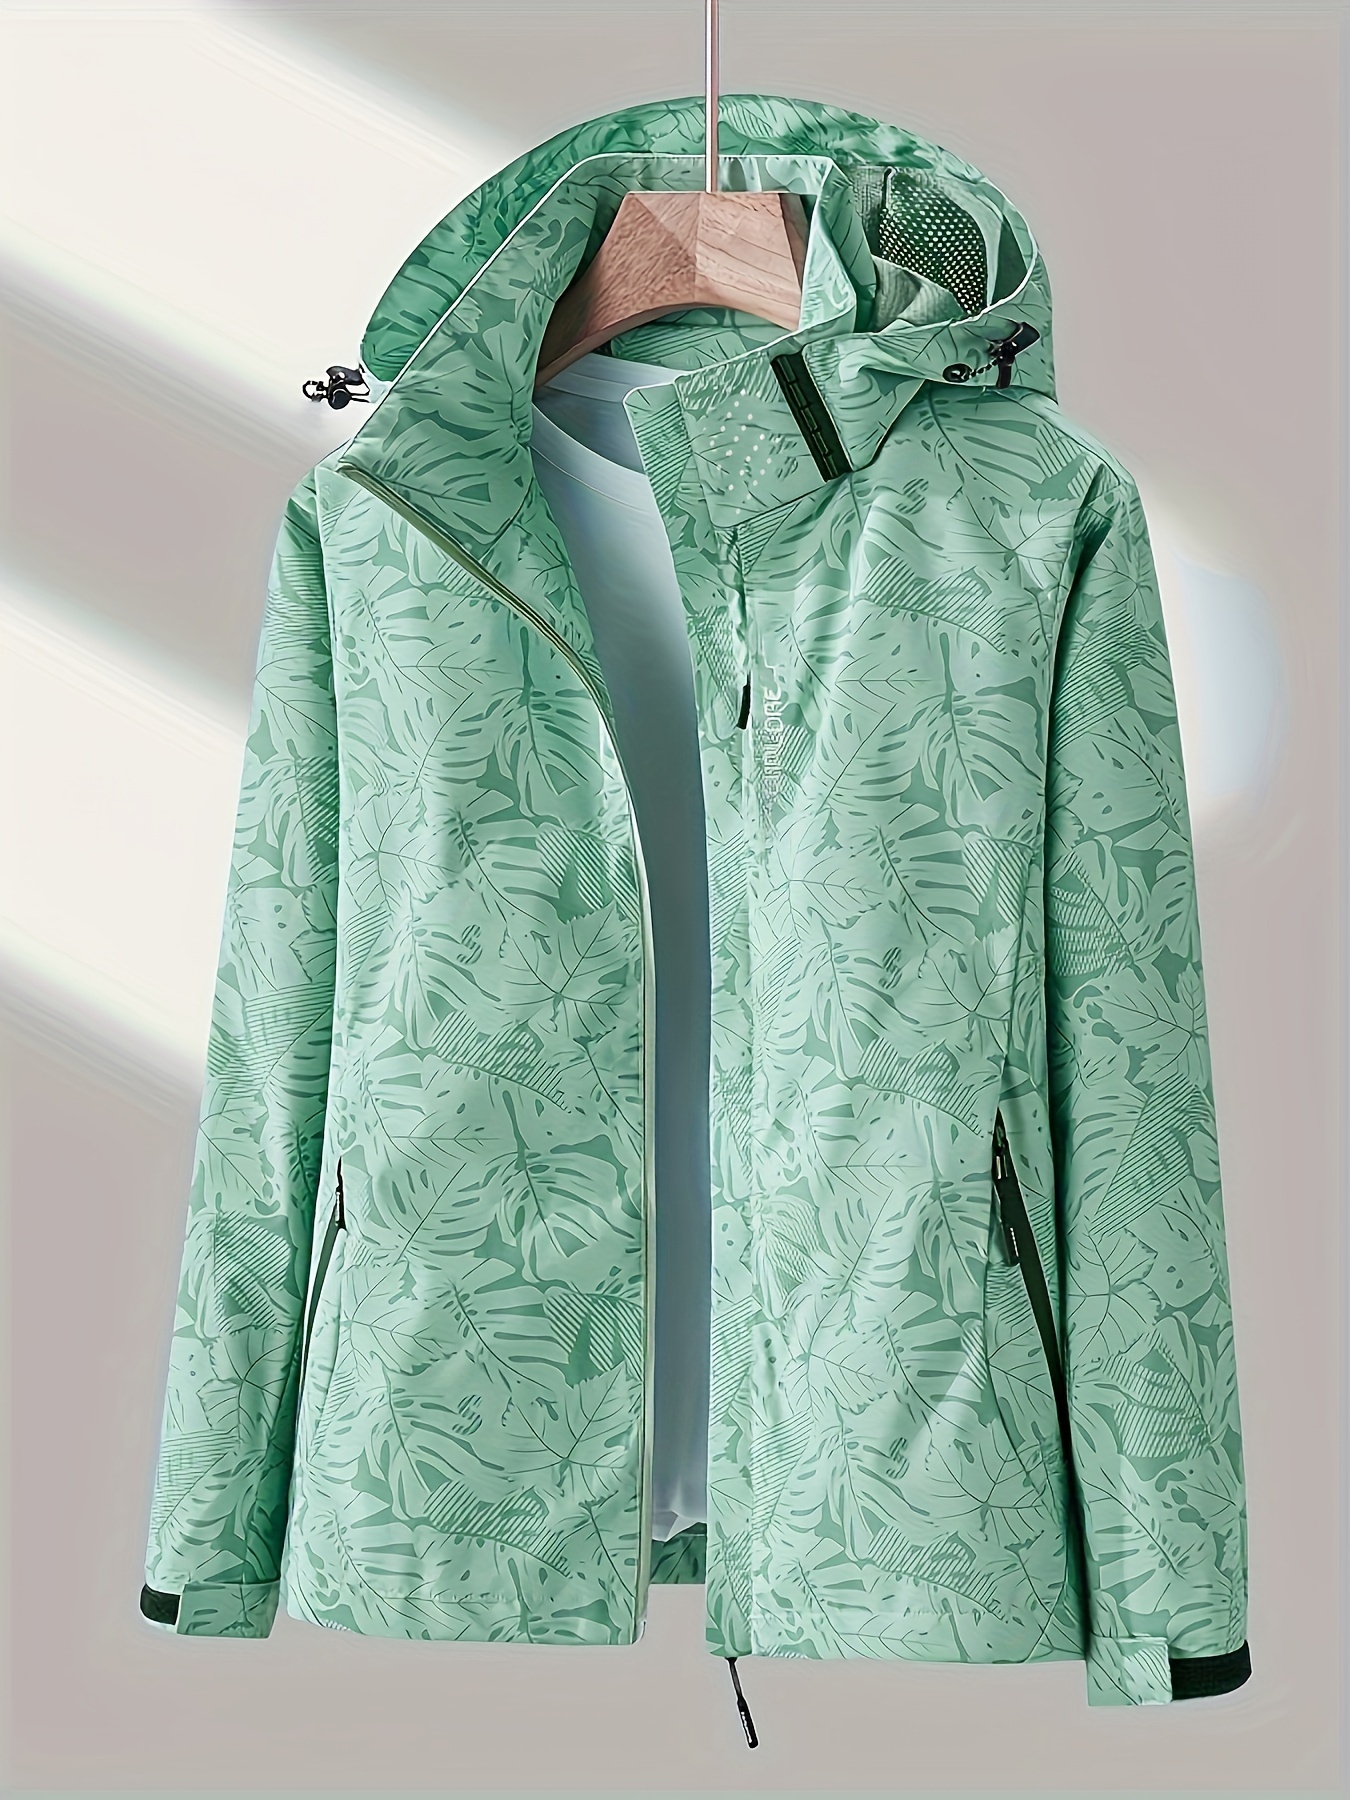 womens camouflage outdoor jacket windproof rainproof with removable hood perfect for outdoor adventures